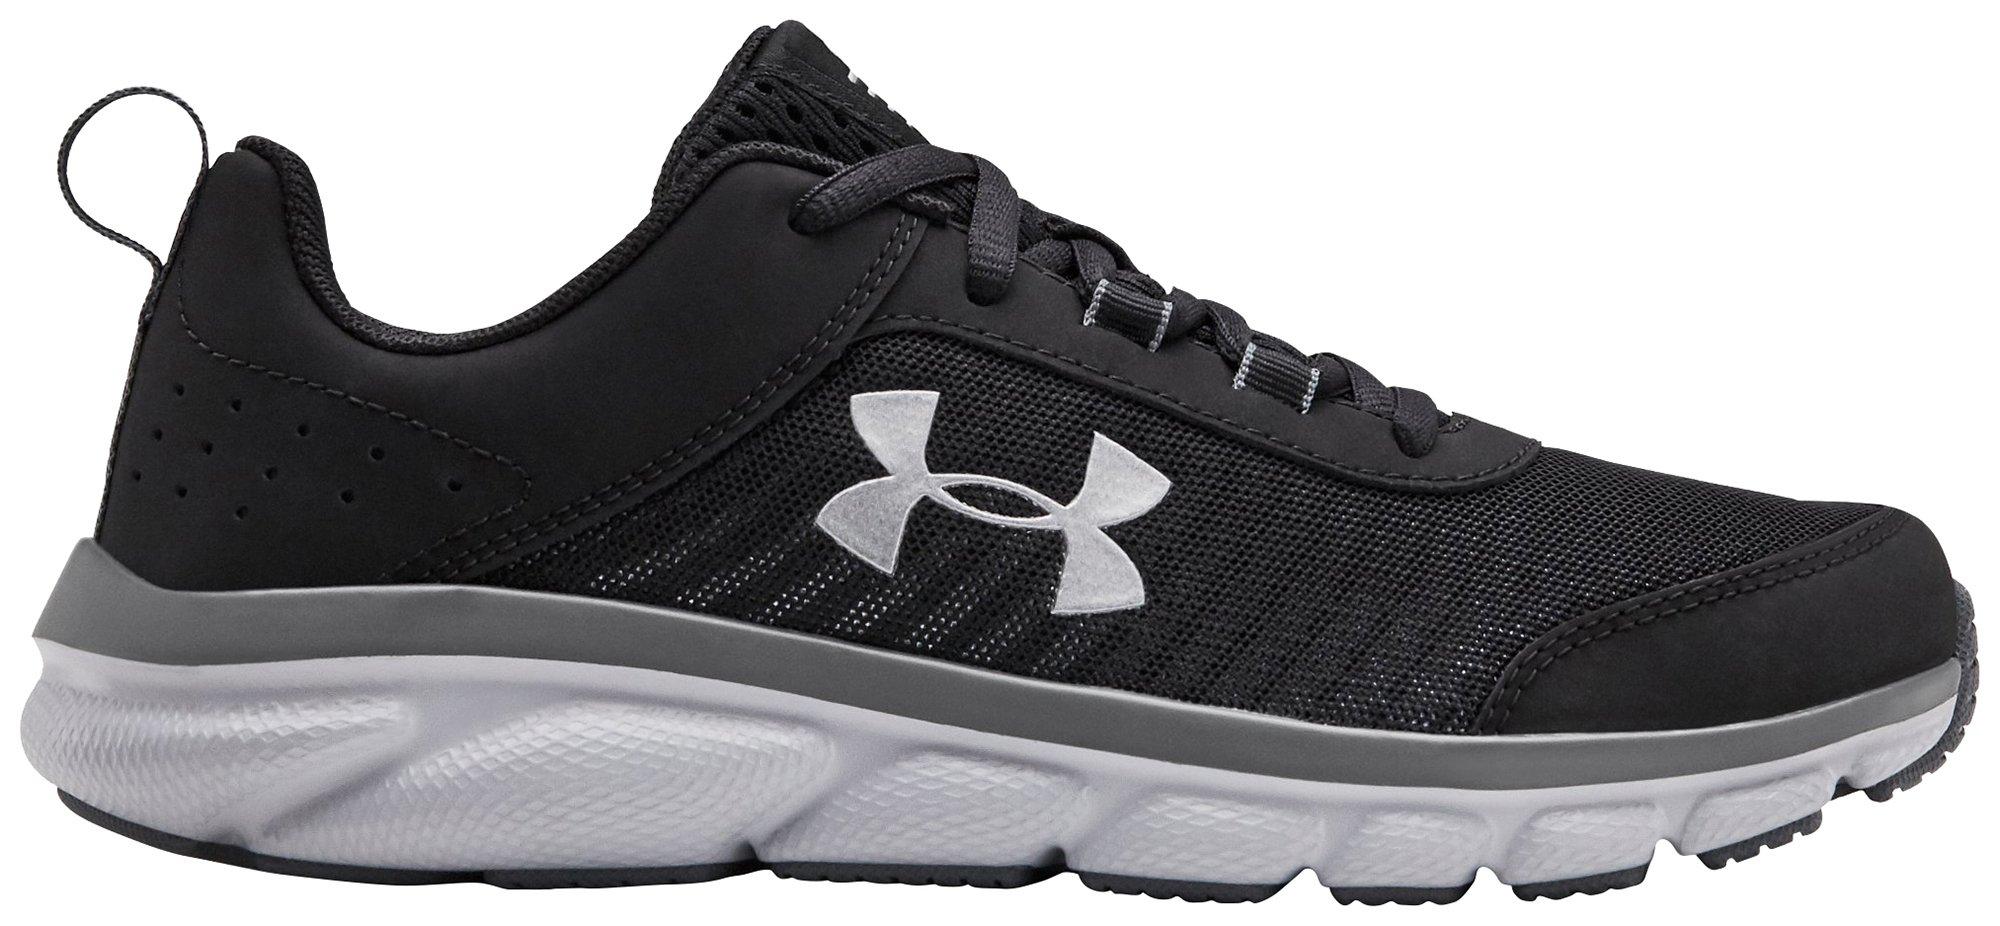 under armour shoes gray